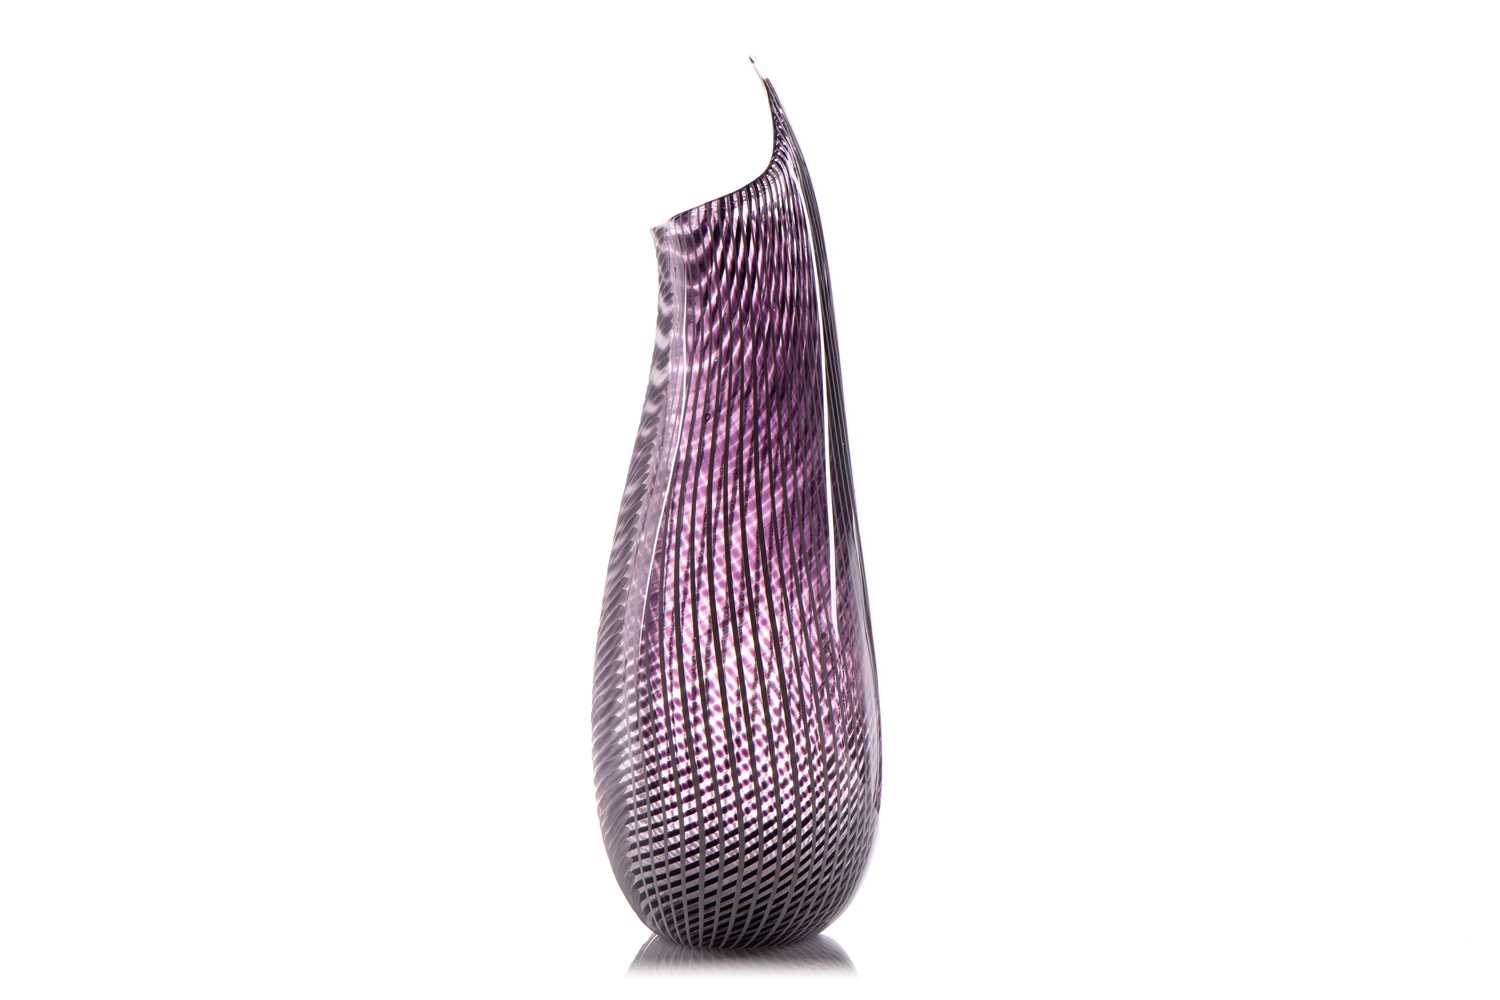 A Luca Vidal Murano large art glass vase with textured finish to one side, bespoke made for the - Image 4 of 9